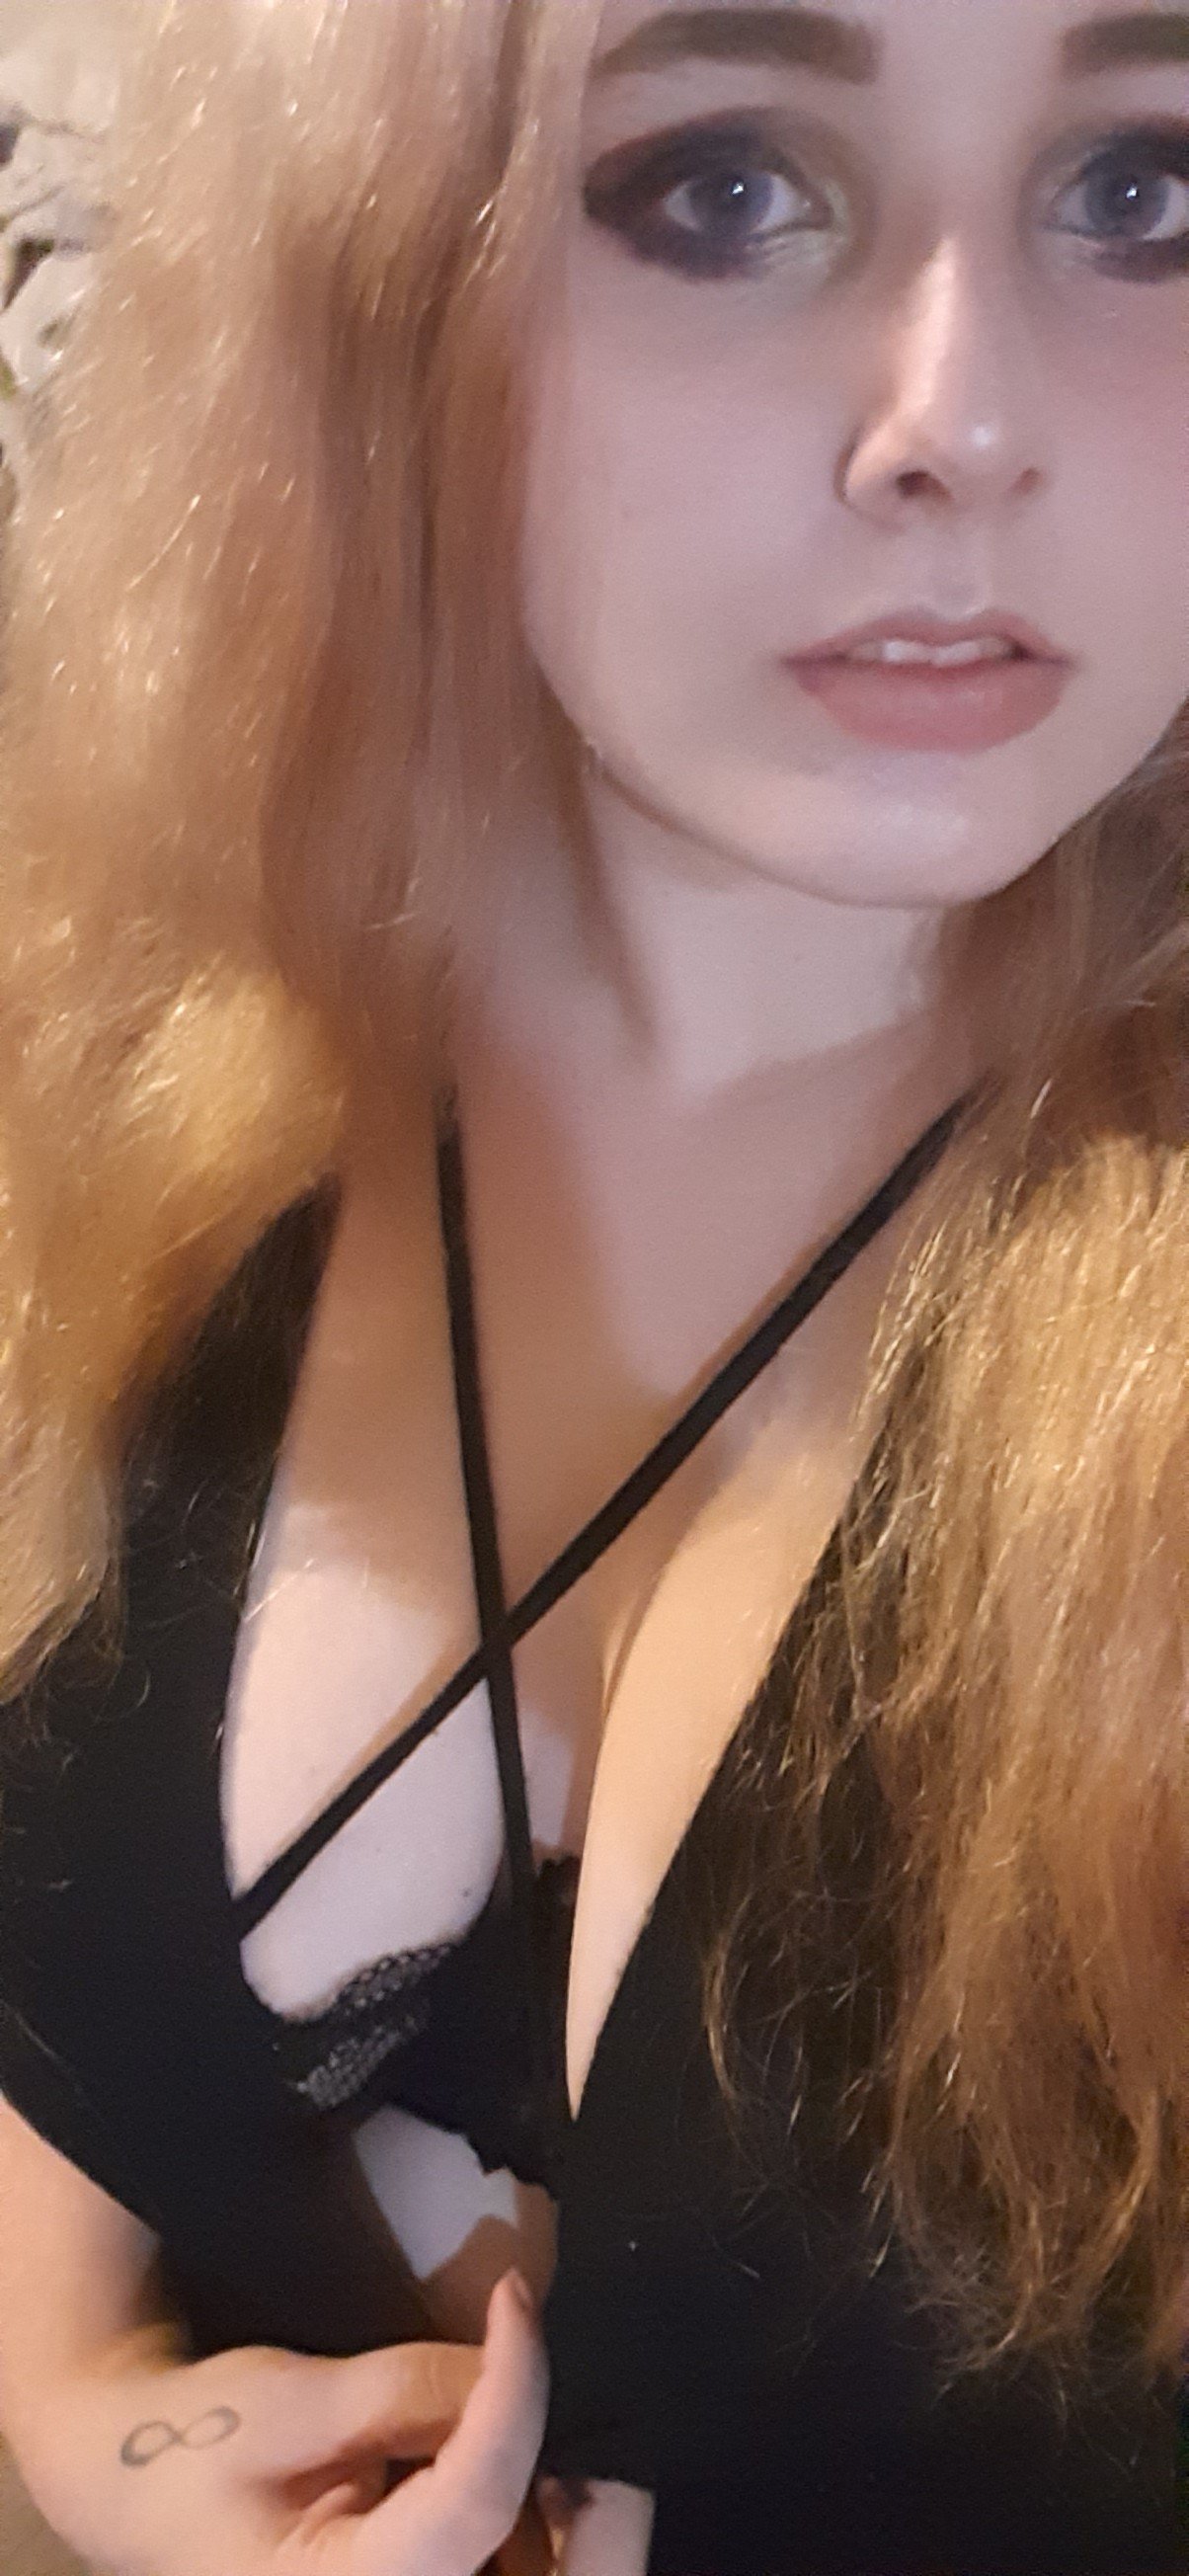 Photo by Hhhh with the username @Jjjjhjjj,  September 19, 2020 at 3:26 AM. The post is about the topic Homemade and the text says '$7 OF SUB madimoonnsw immediate access to over 60+ pics and videos BJ/Deepthroat/GG/Striptease Custom content always available Fetish Friendly Daily Content always available Fetish Friendly Daily content Full Nude with Face Chubby MILF 😘🥰💋 Link in..'